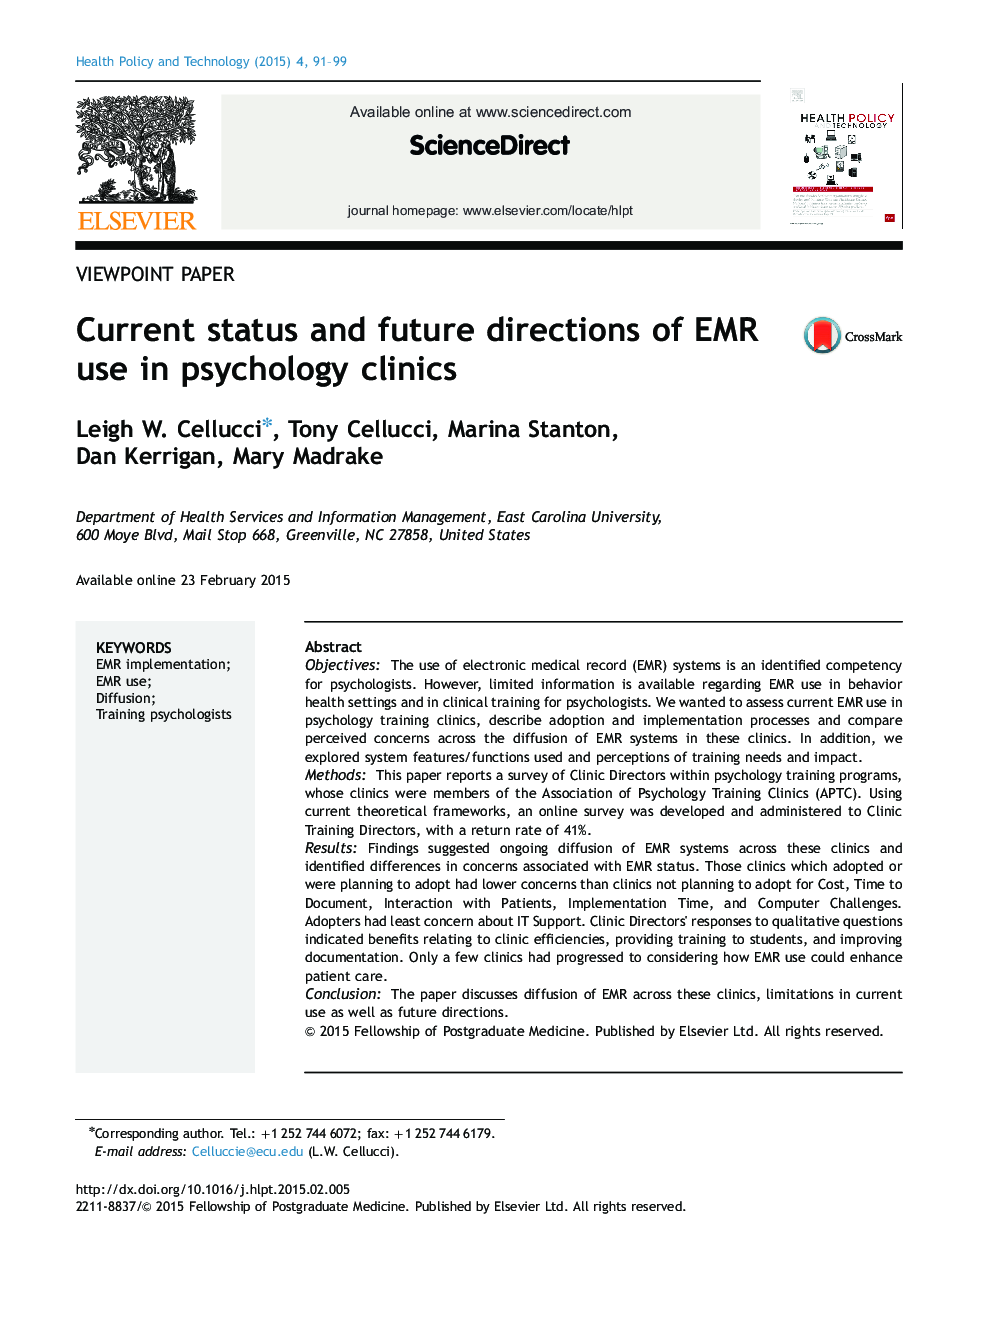 Current status and future directions of EMR use in psychology clinics